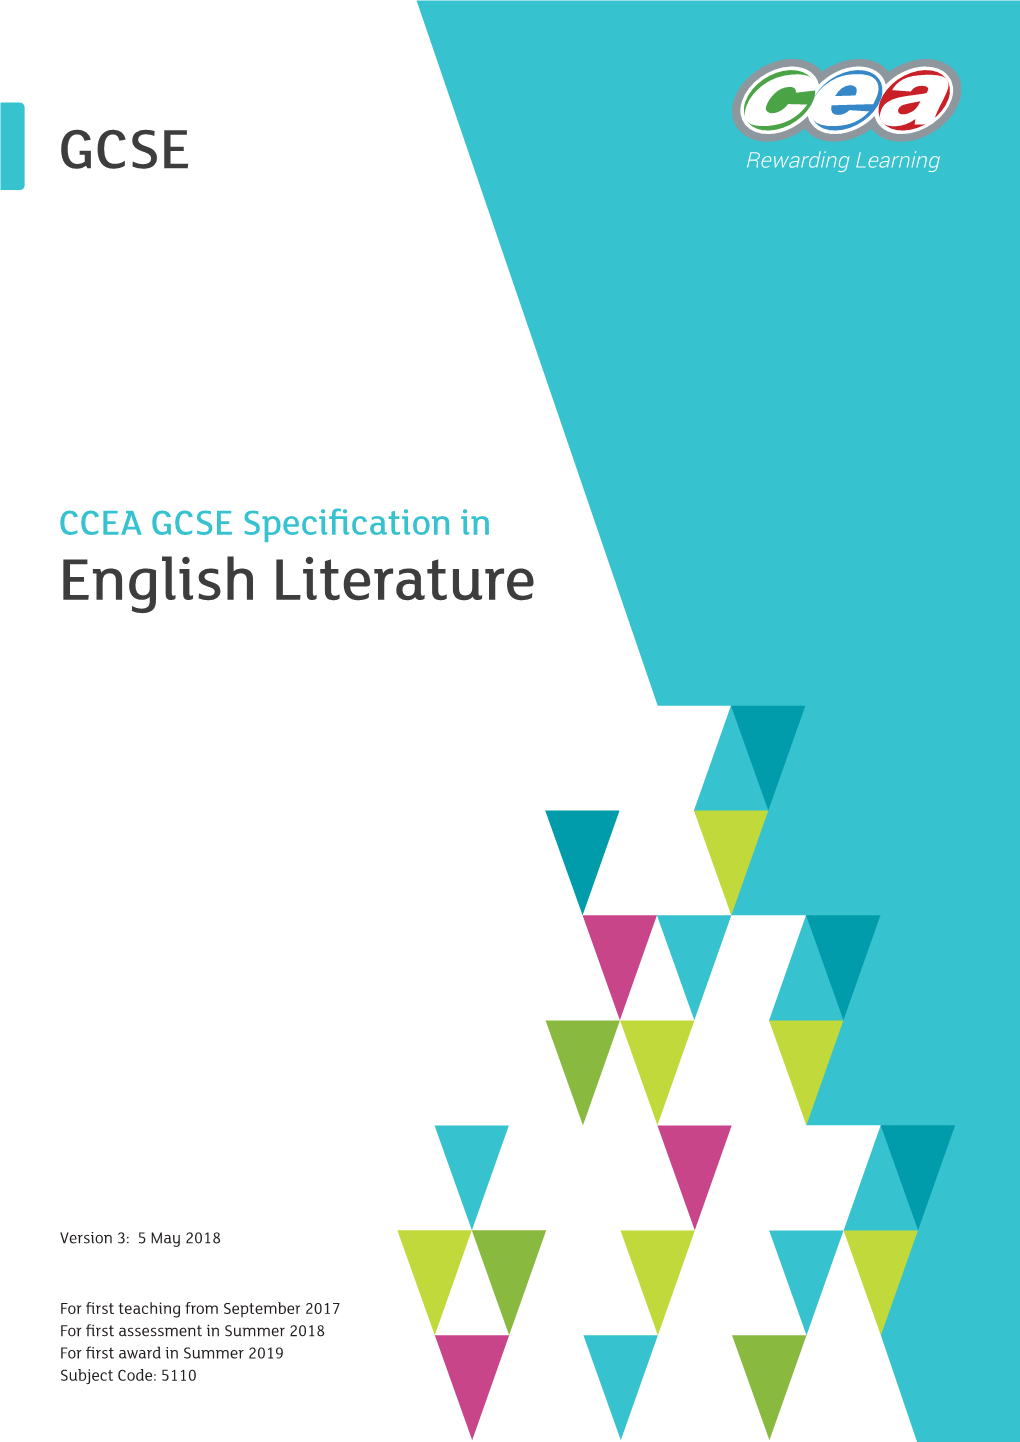 CCEA GCSE Specification in English Literature